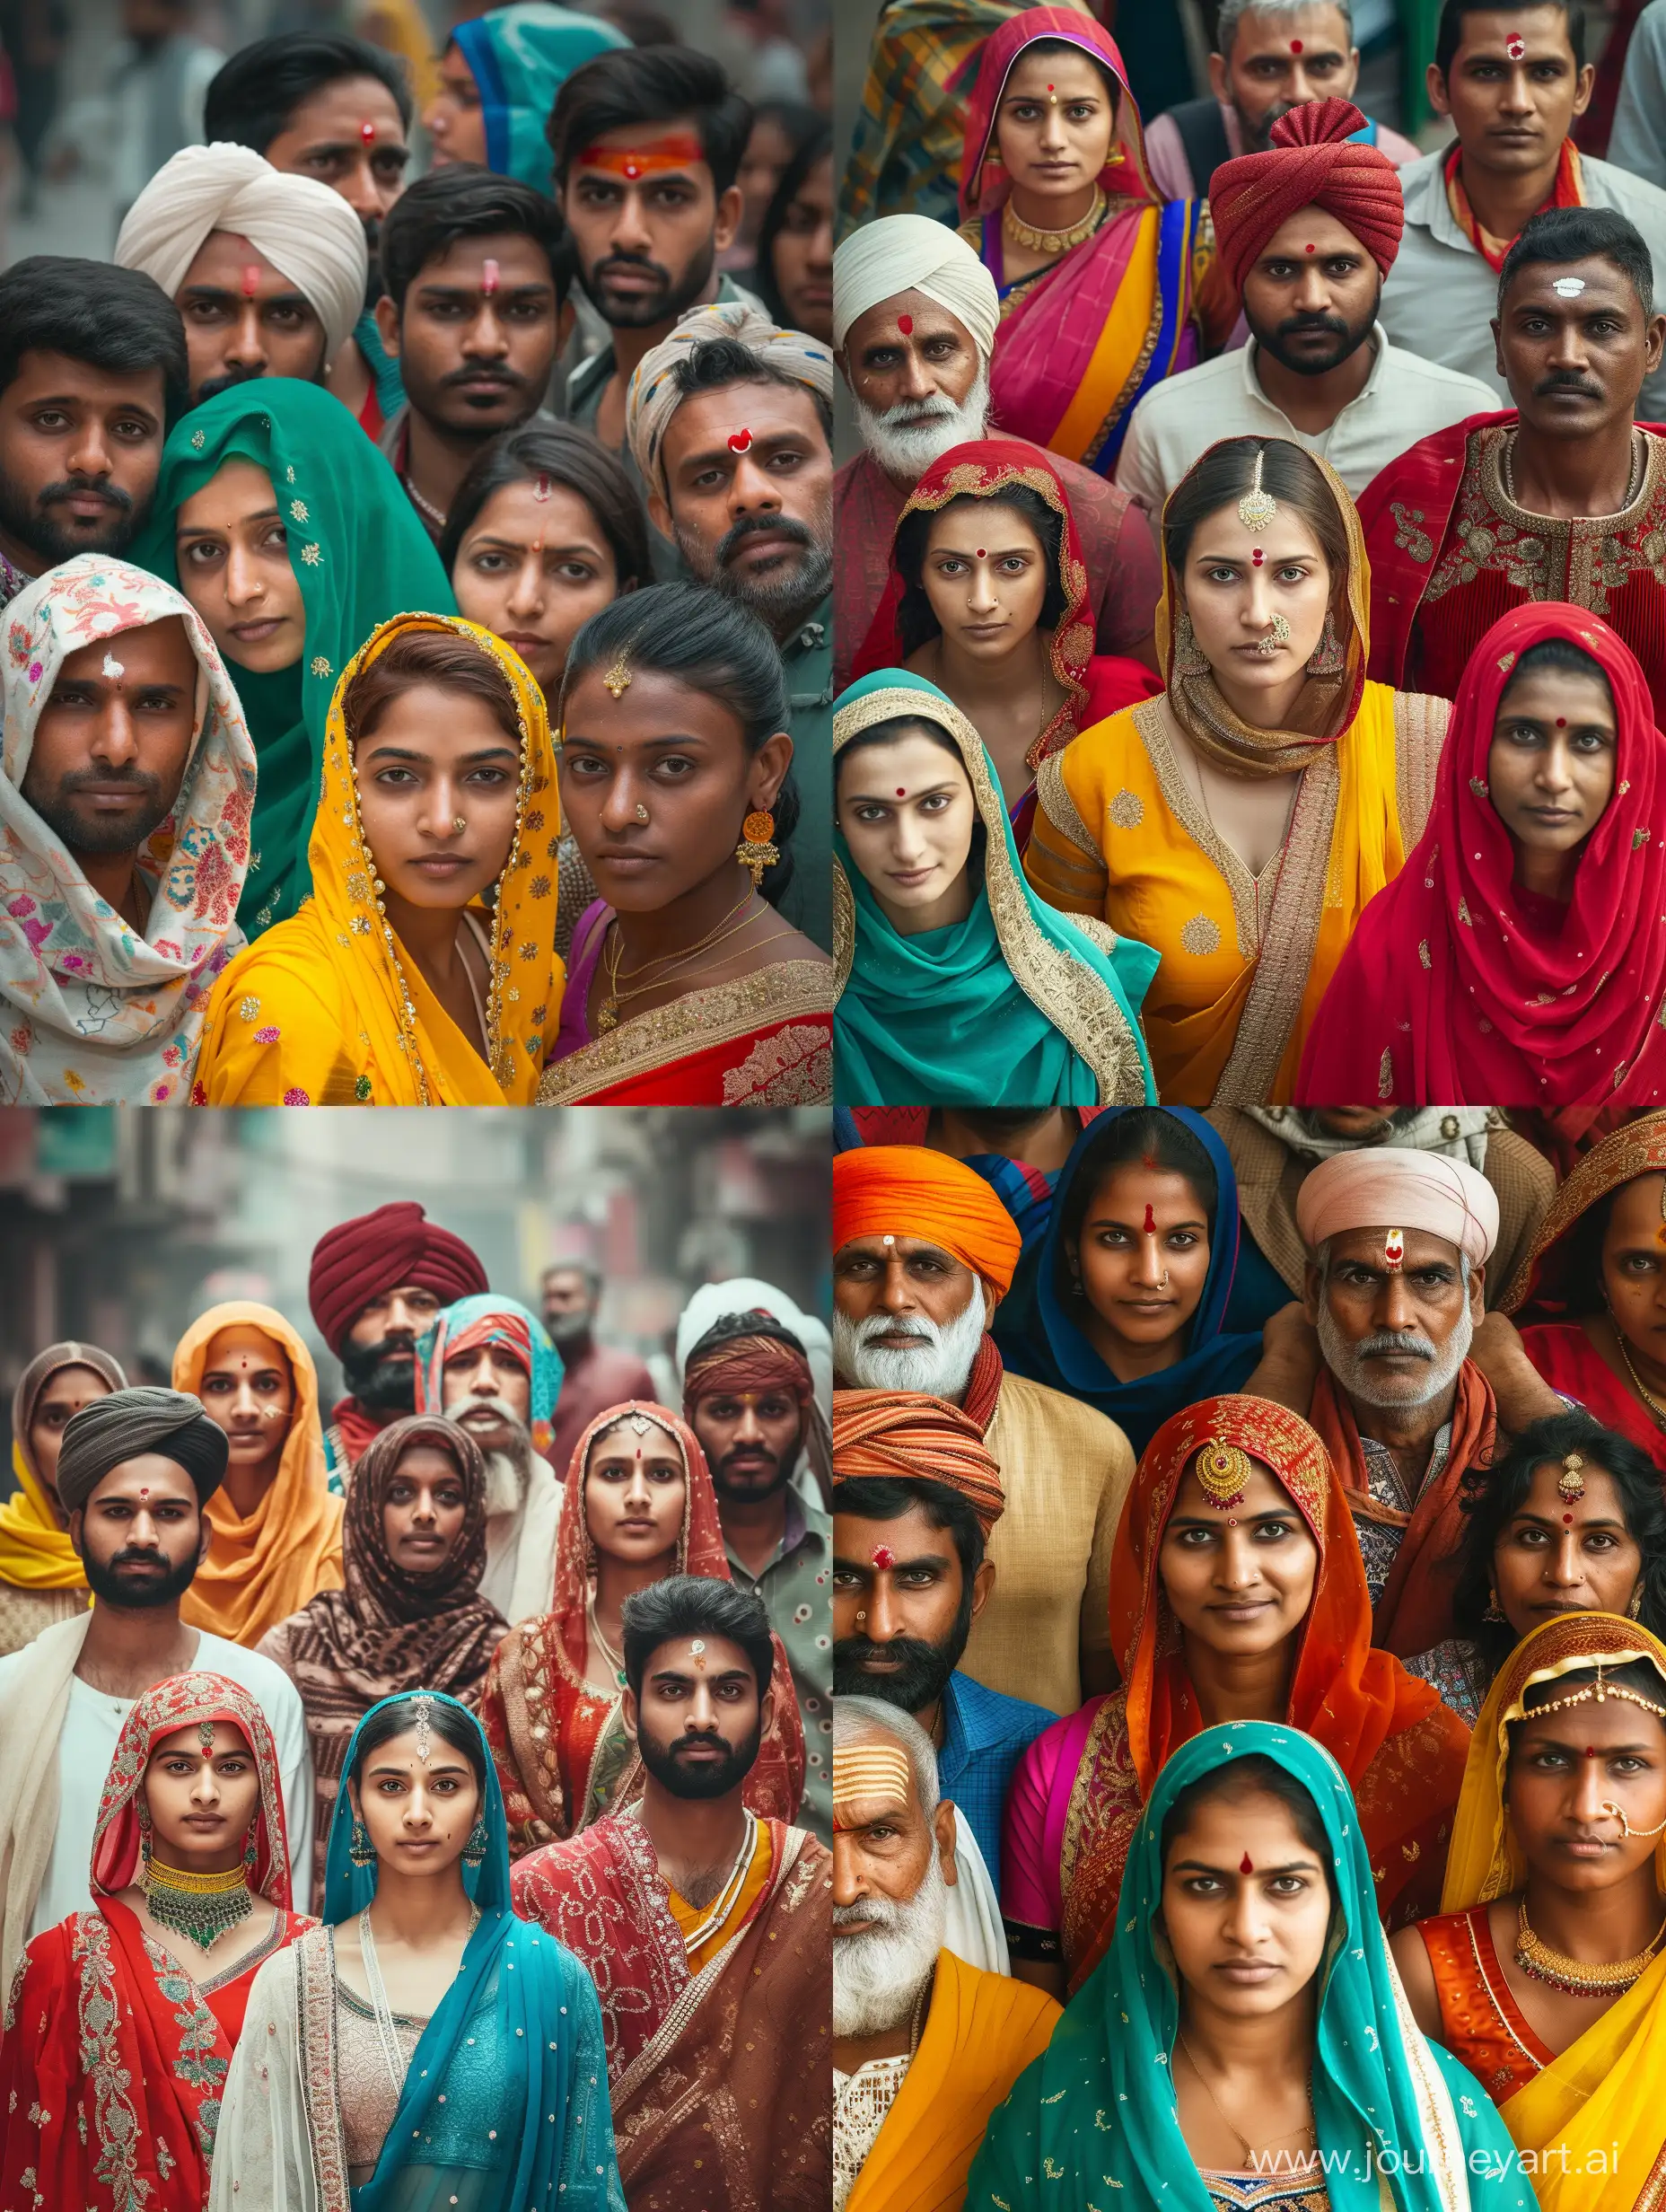 10 Indian people together,All diffrent ethnic groups,all diffrent traditional clothing and Looks, the people on left represent north indians and are whiter skin colour,left white skin,right represent south india and have a darker skincolour,right is dark skin,4K, photo is generated 15 meters away,the people ar in a city, everybode has a little bit of distance to each other